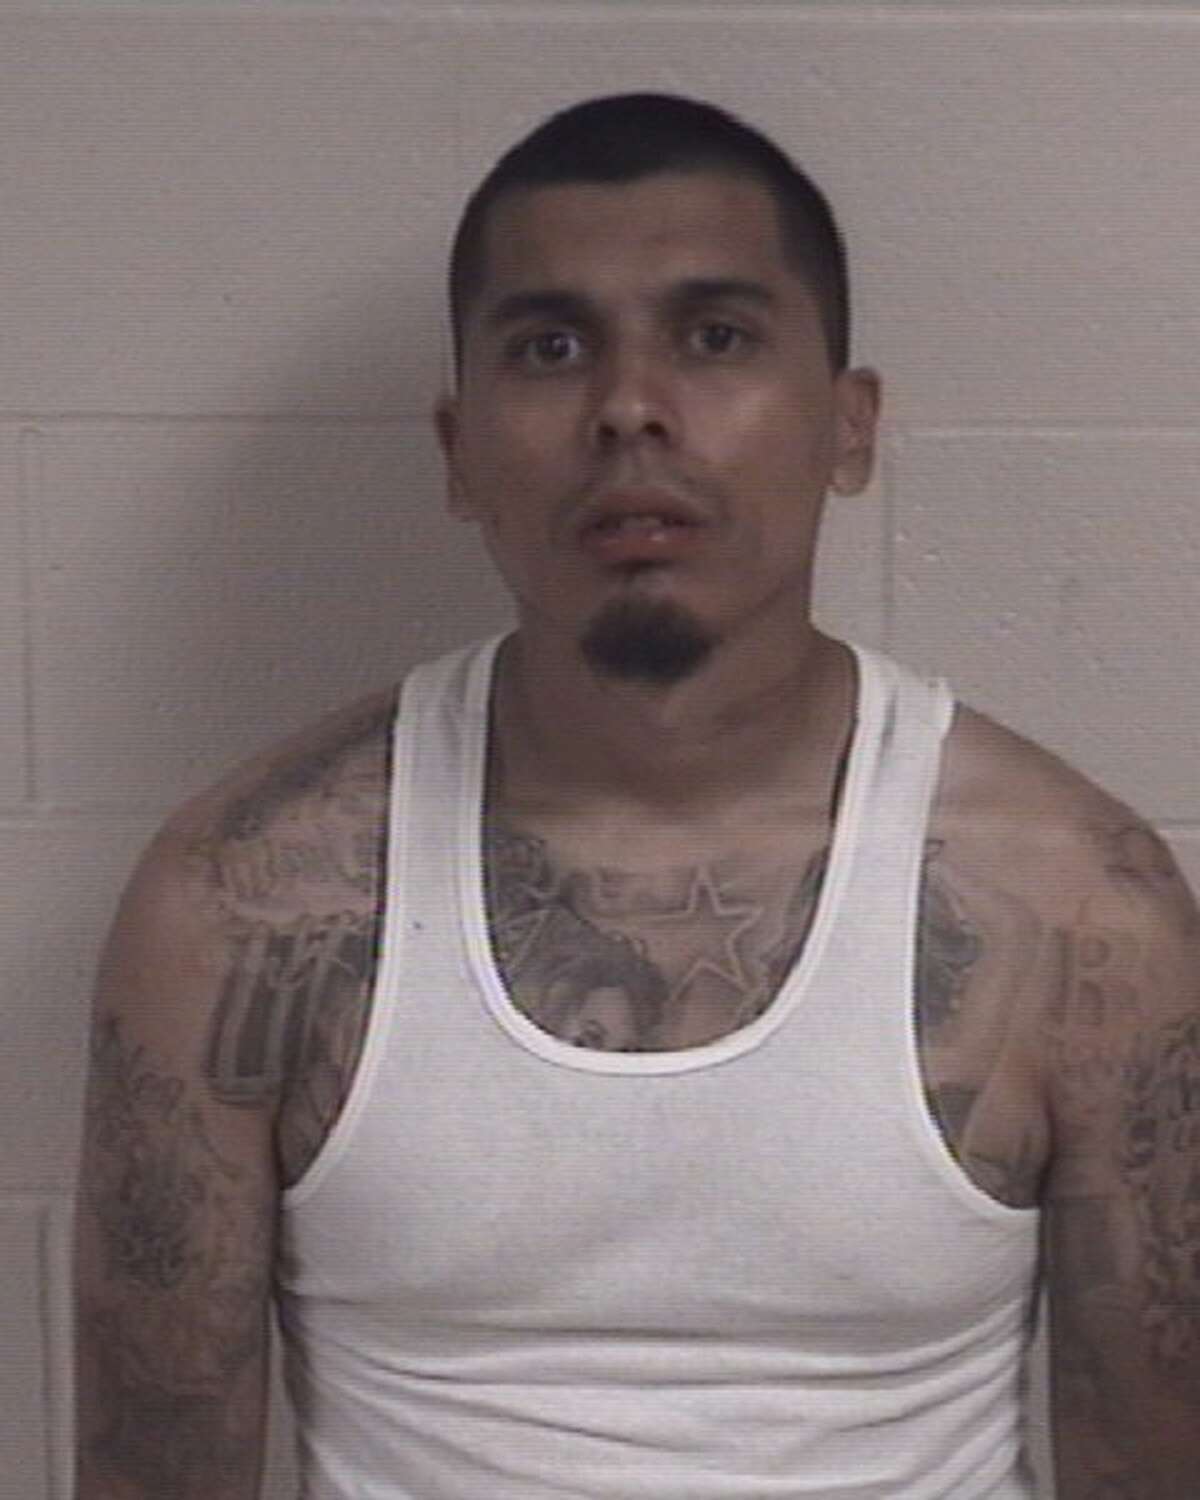 Josue Cardona-Sanchez was charged with driving while intoxicated and evading arrest or detention.